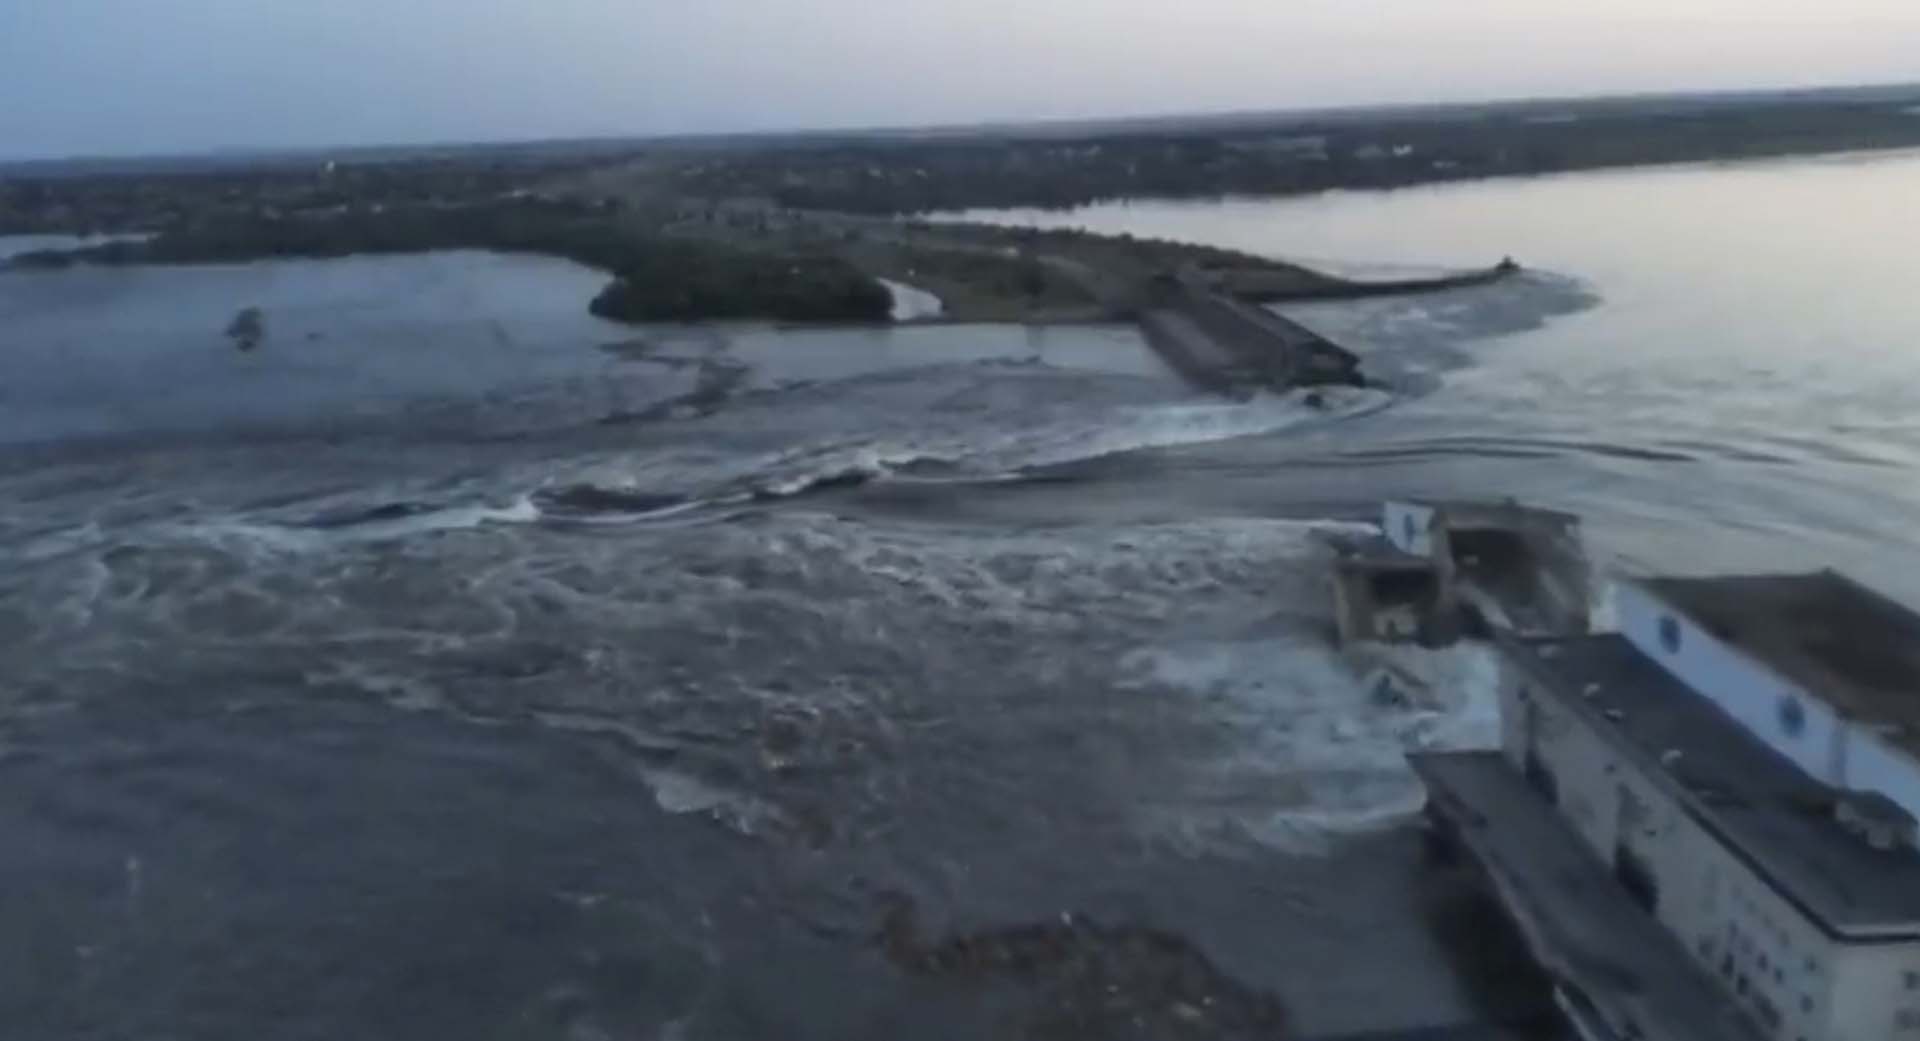 The strategic Kakhovka dam was destroyed by an explosion, releasing water that is flooding an area of ​​tens of thousands of hectares.  Ukraine claims it was the Russians to prevent their expected counteroffensive (Ukrainian Presidential Office via AP)